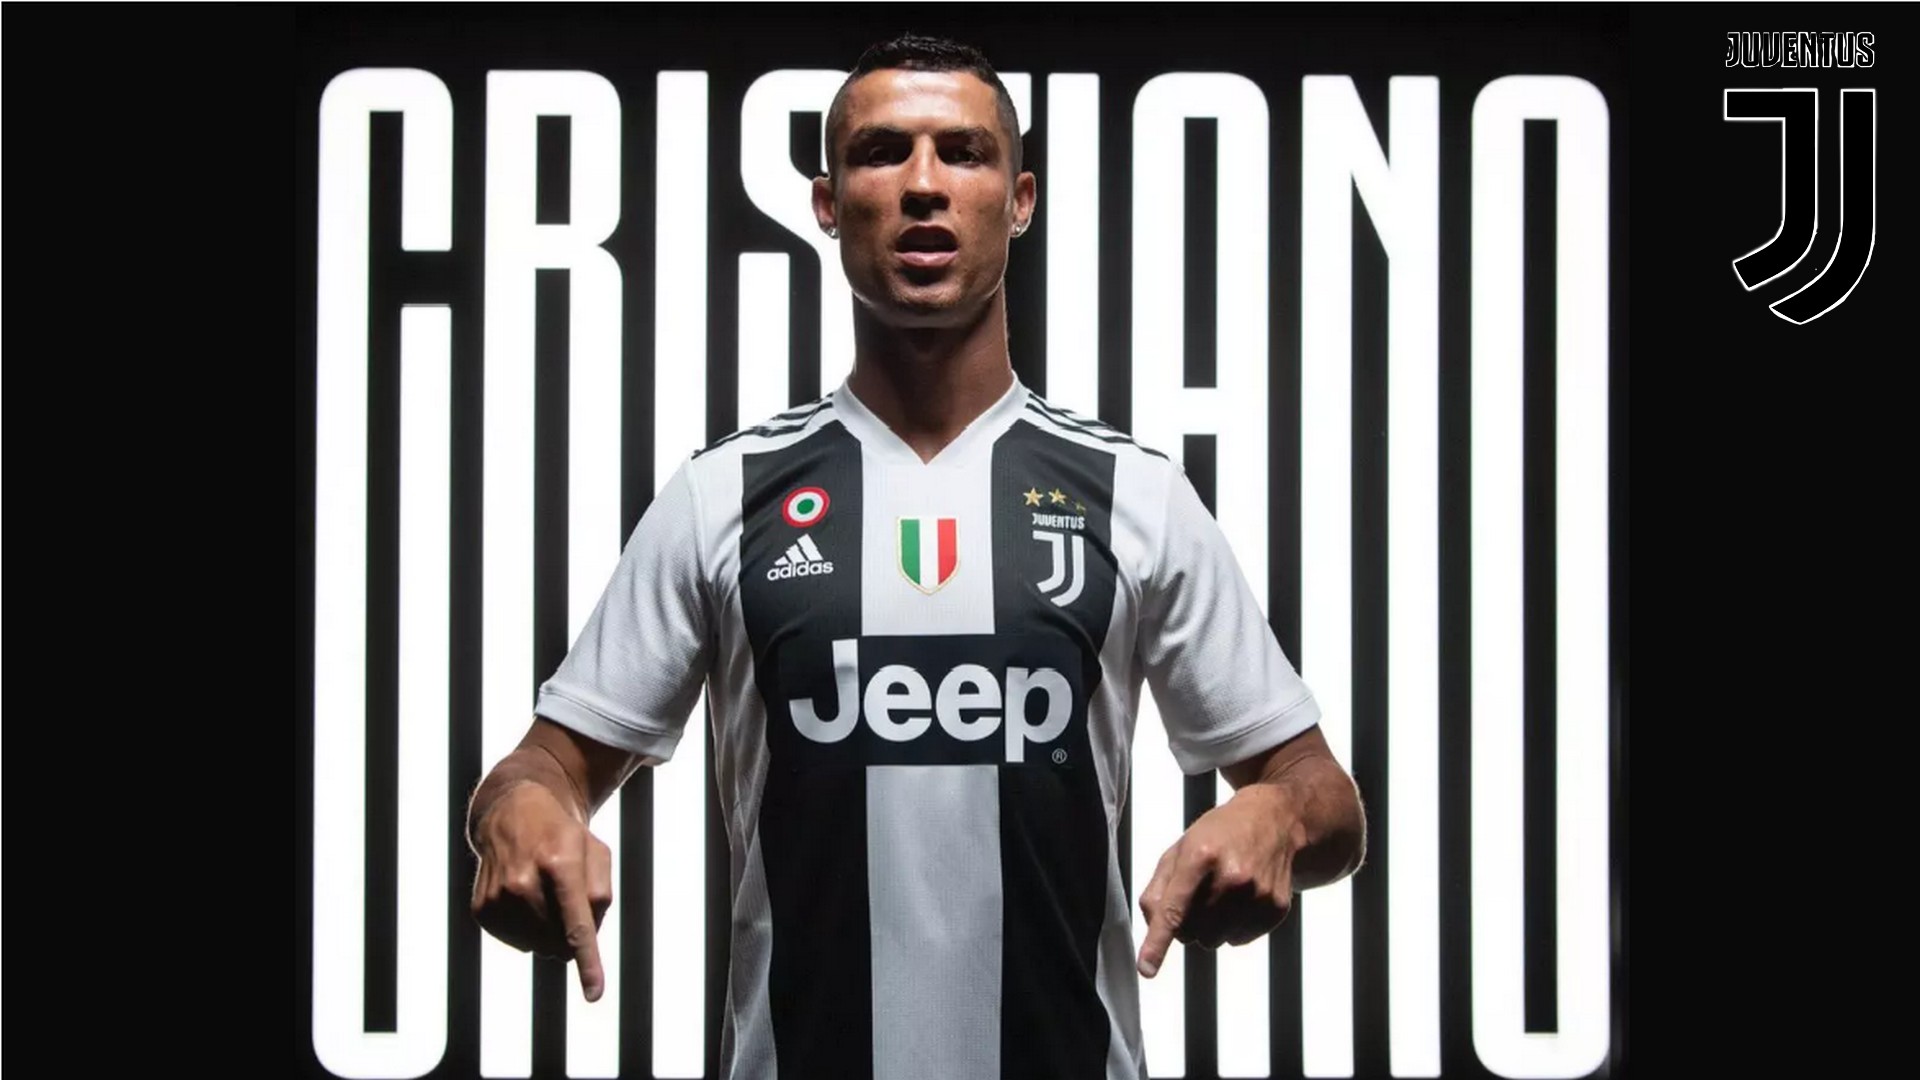 Ronaldo 7 Juventus HD Wallpapers with resolution 1920x1080 pixel. You can make this wallpaper for your Mac or Windows Desktop Background, iPhone, Android or Tablet and another Smartphone device